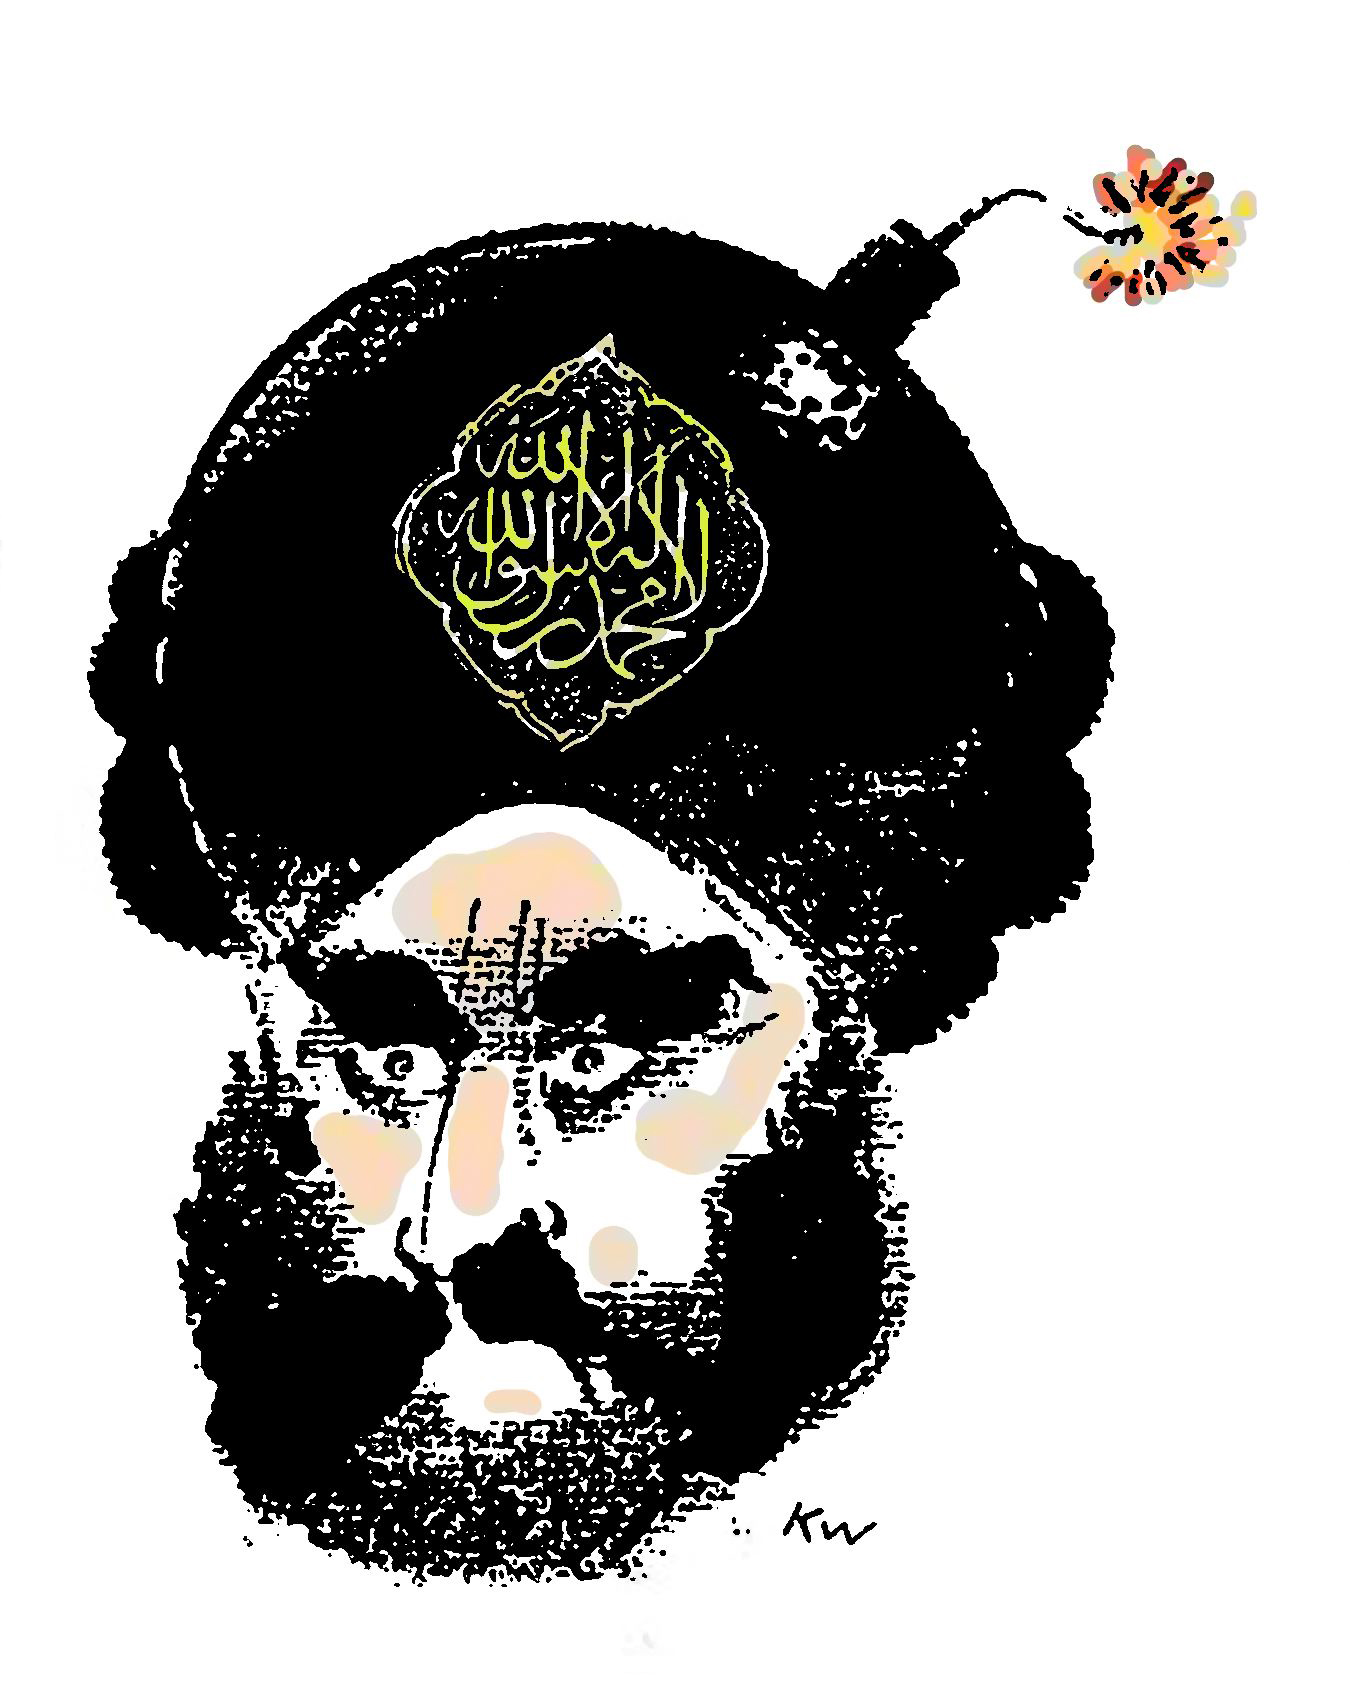 Muhammad appears to have a bomb in his turban, in the most famous cartoon of the series of 12 published by the Danish newspaper Jyllands-Posten, September 30, 2005.